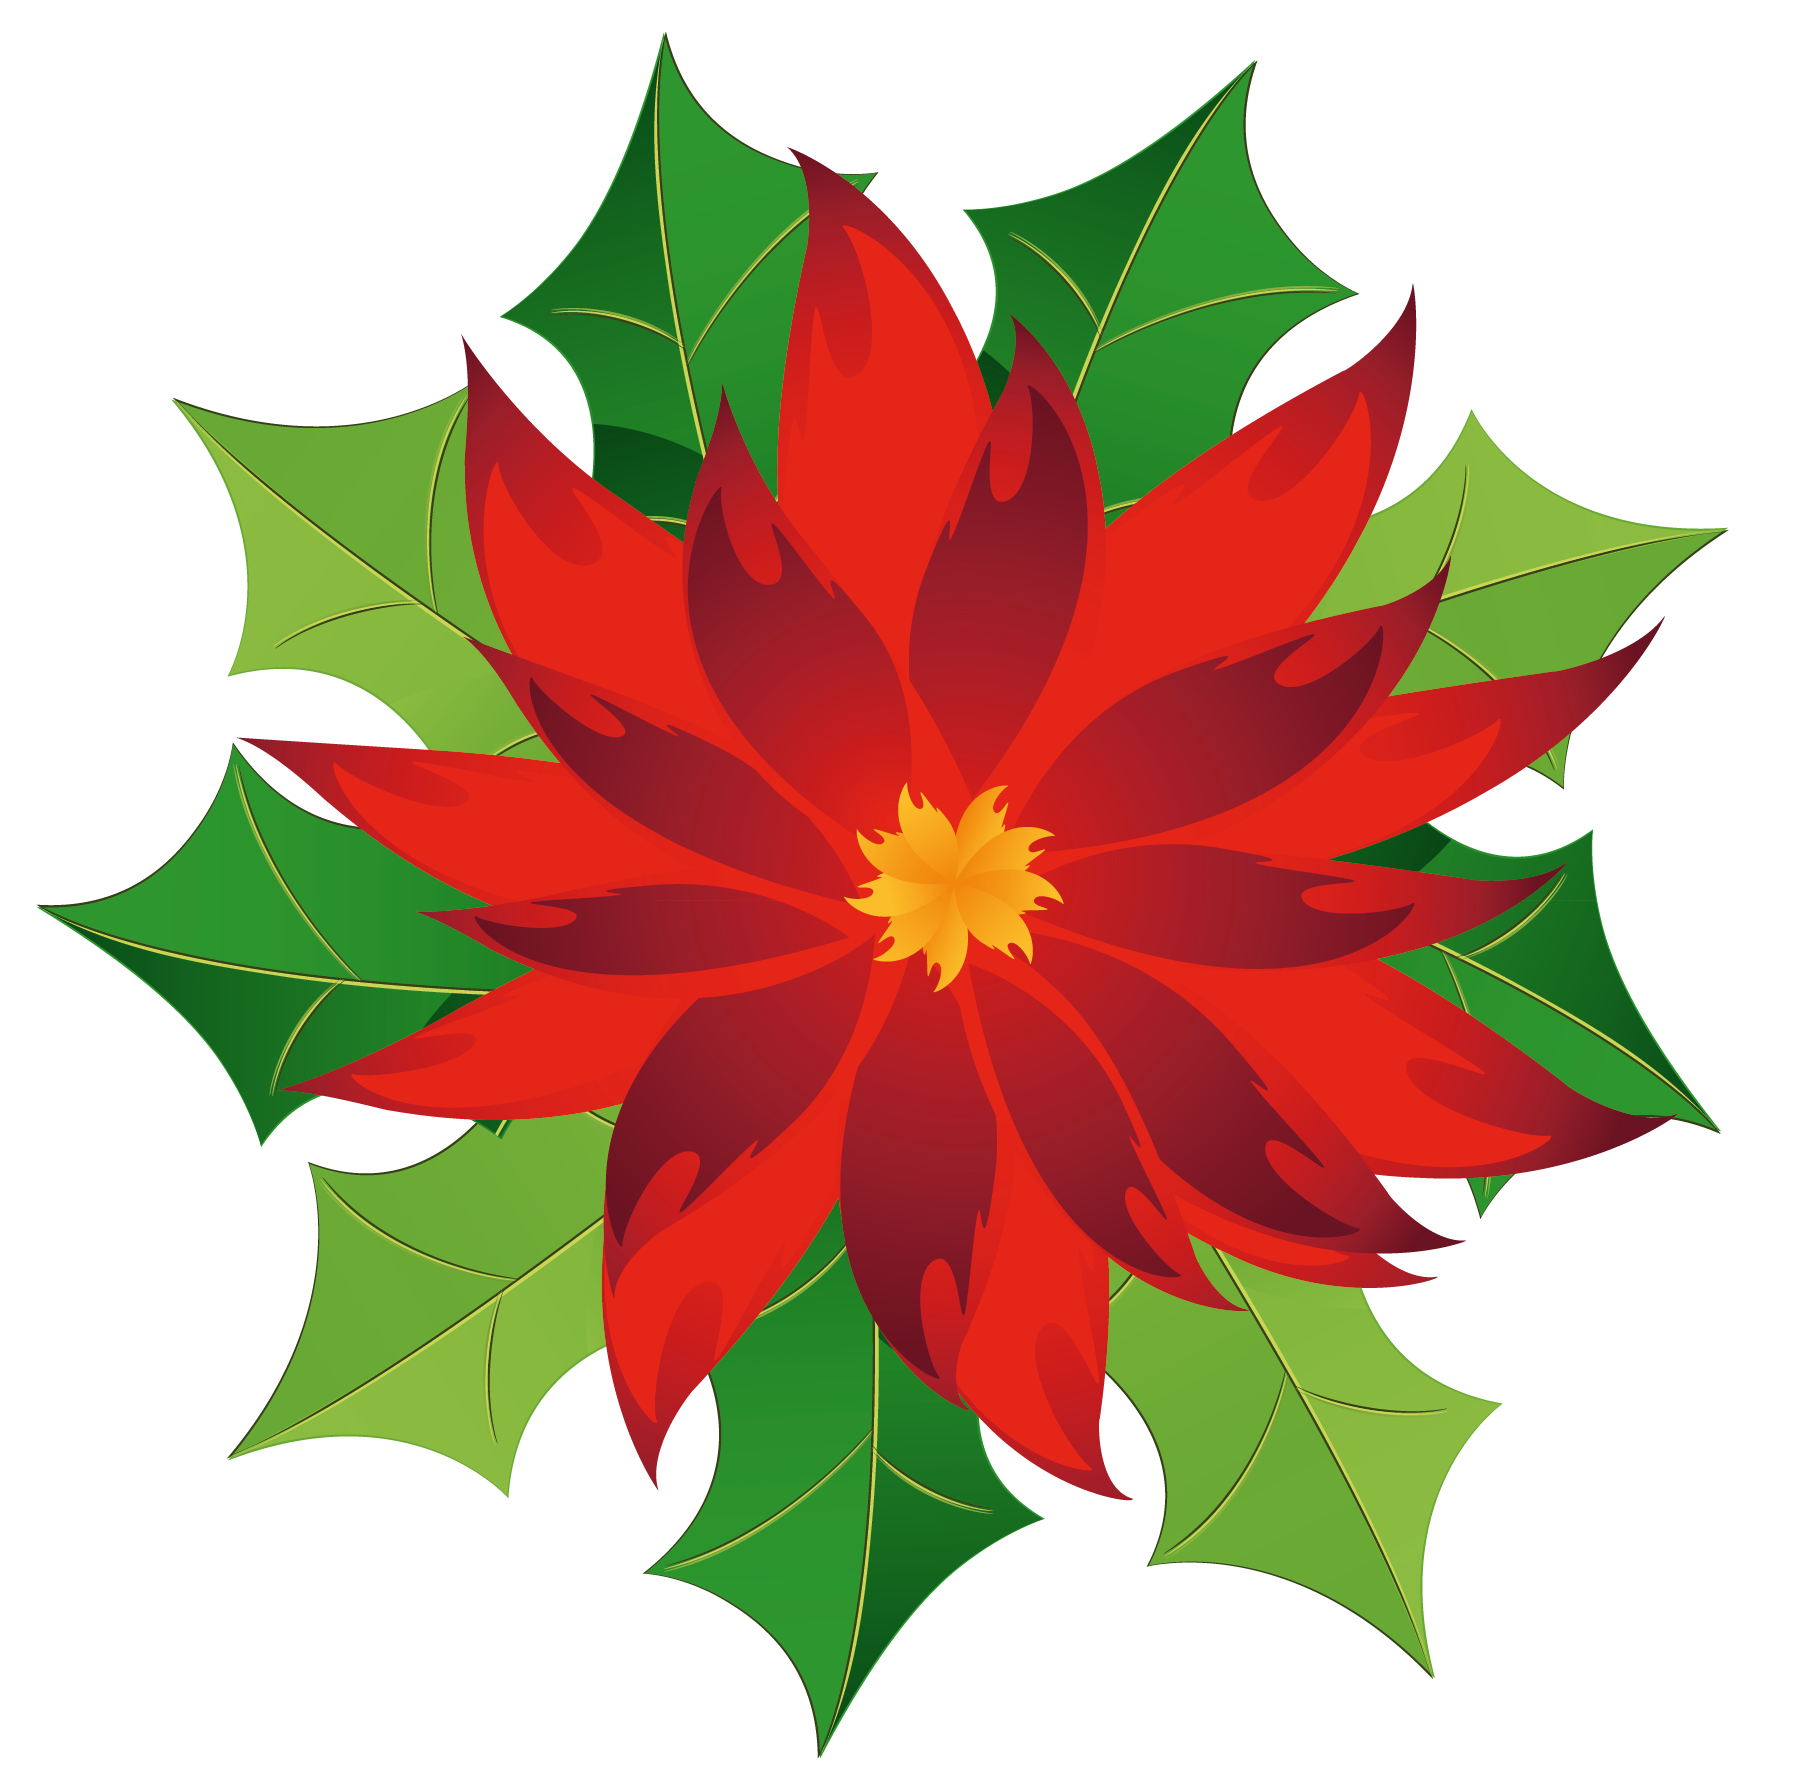 Clip Arts Related To : Poinsettia Transparent Red Poinsettia. view all Chri...